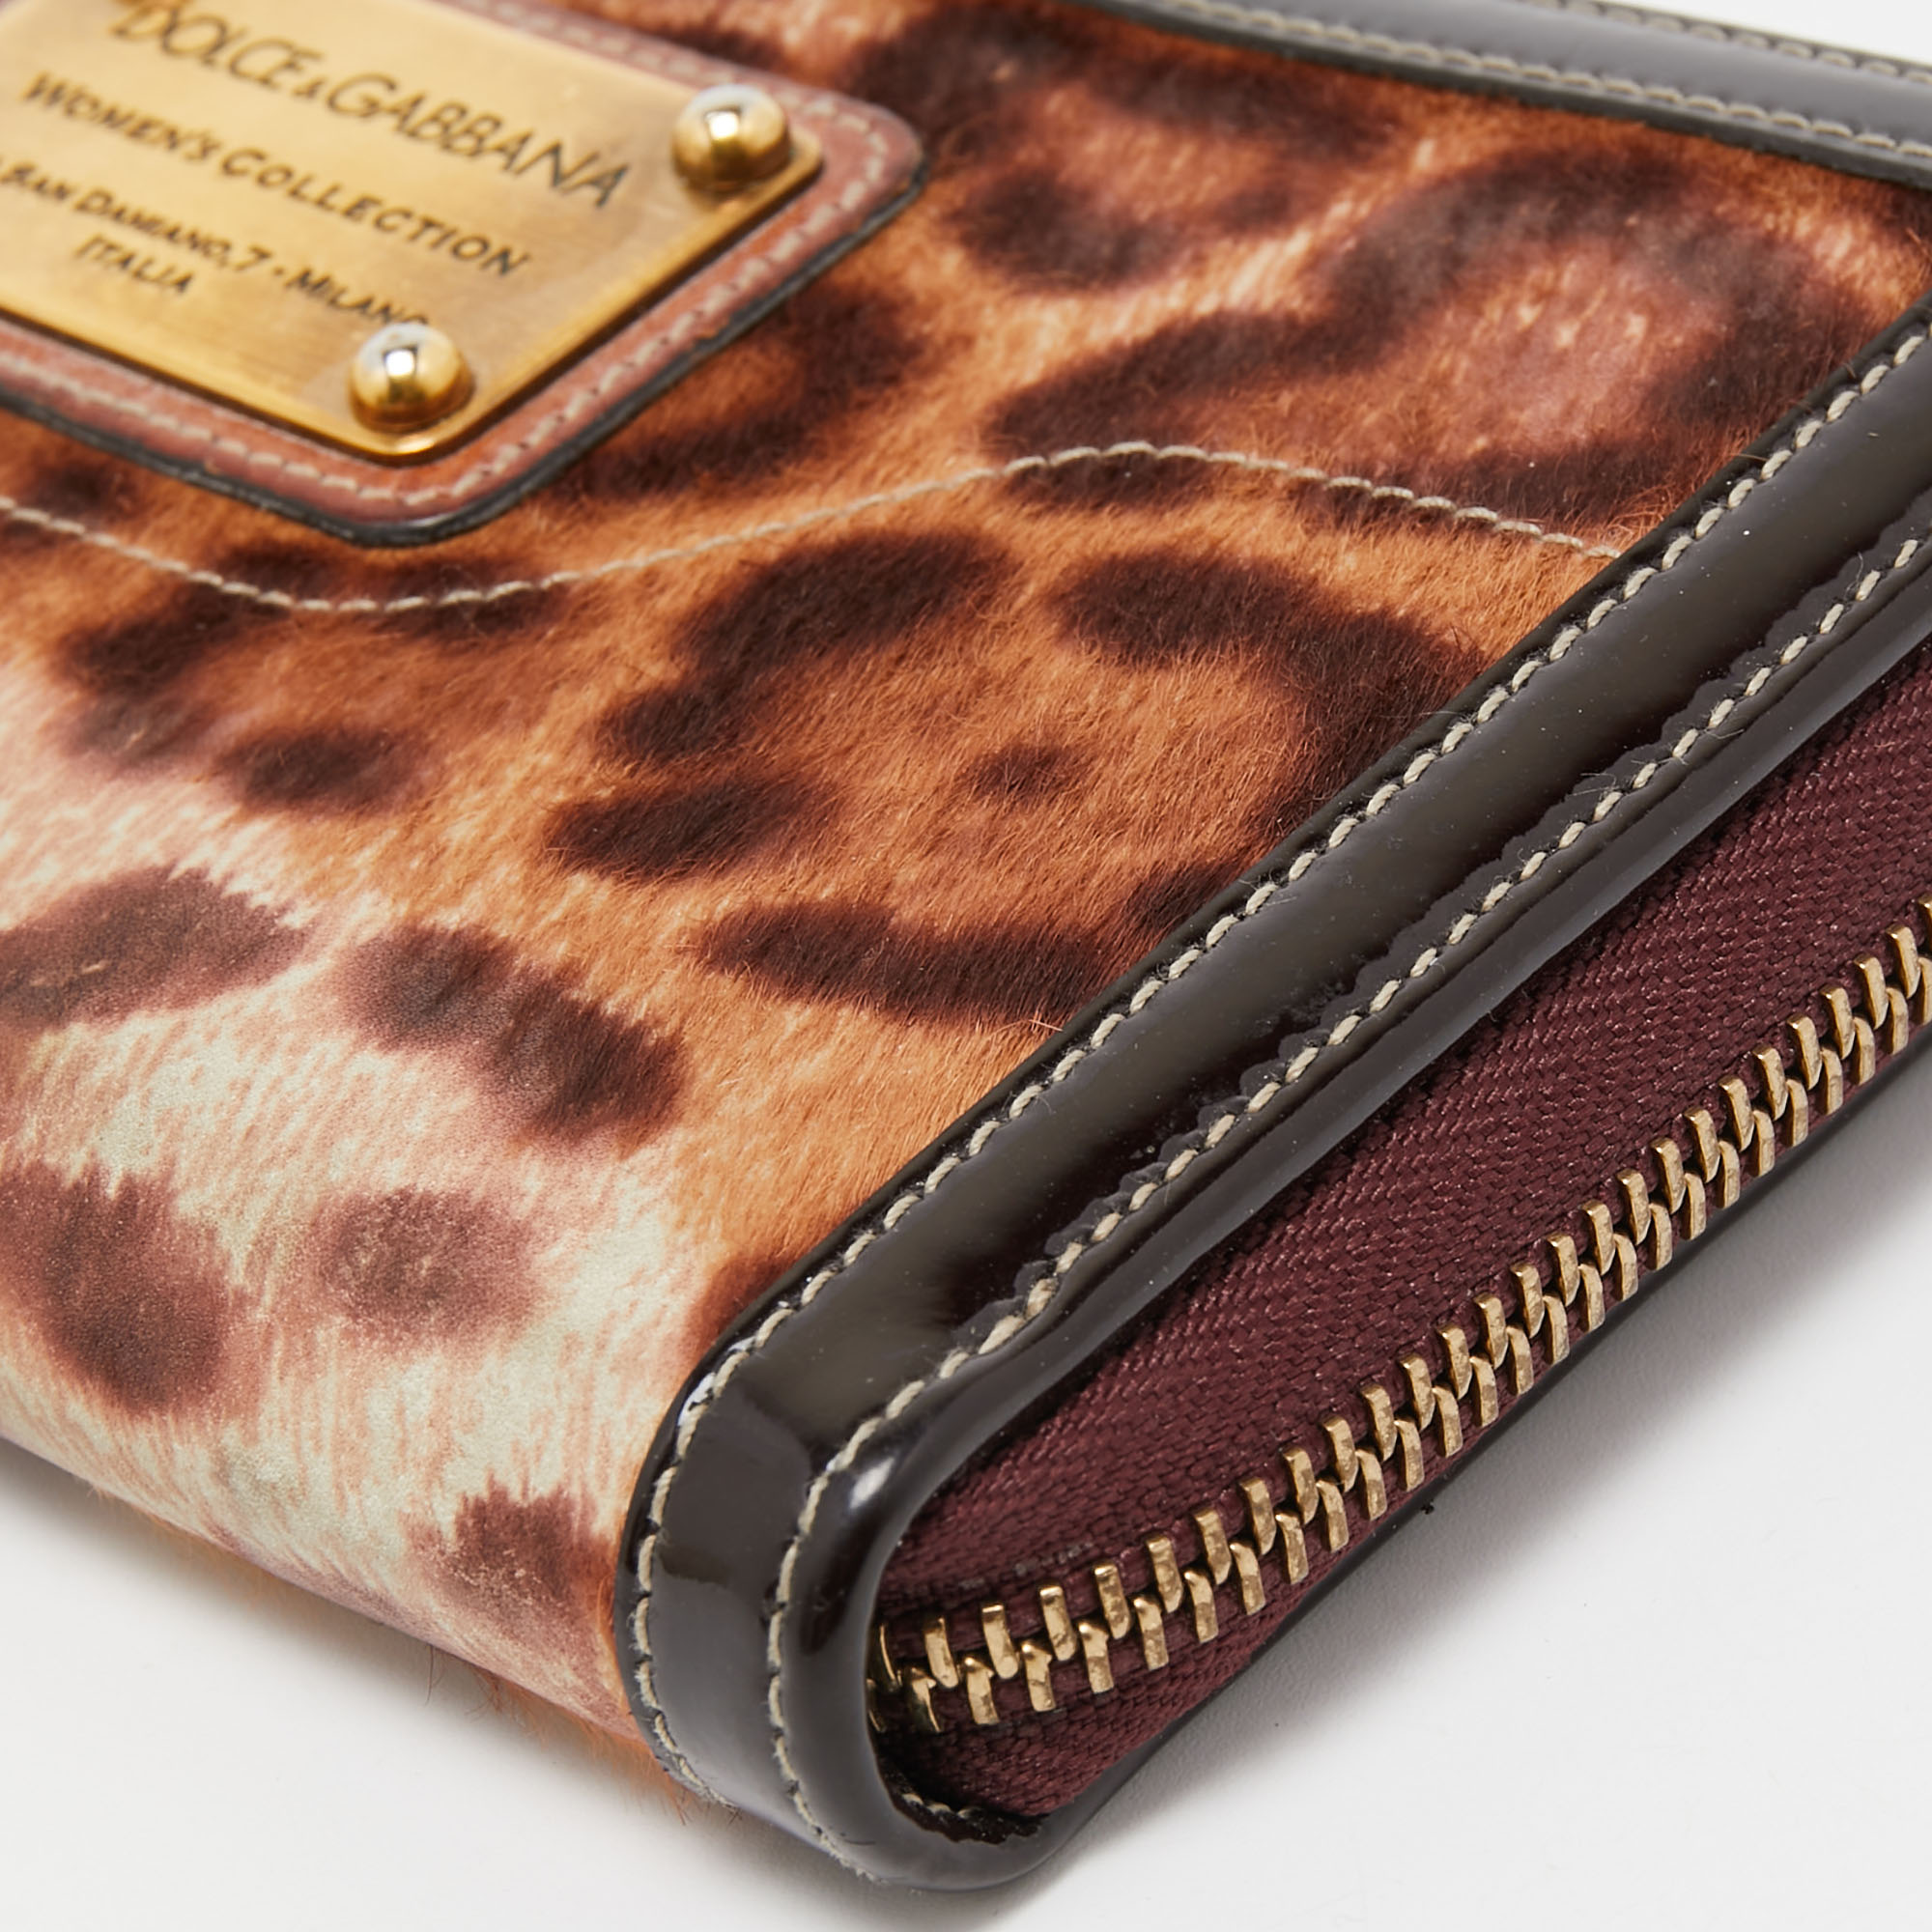 Dolce & Gabbana Brown Leopard Print Calfhair And Patent Leather Zip Around Continental Wallet